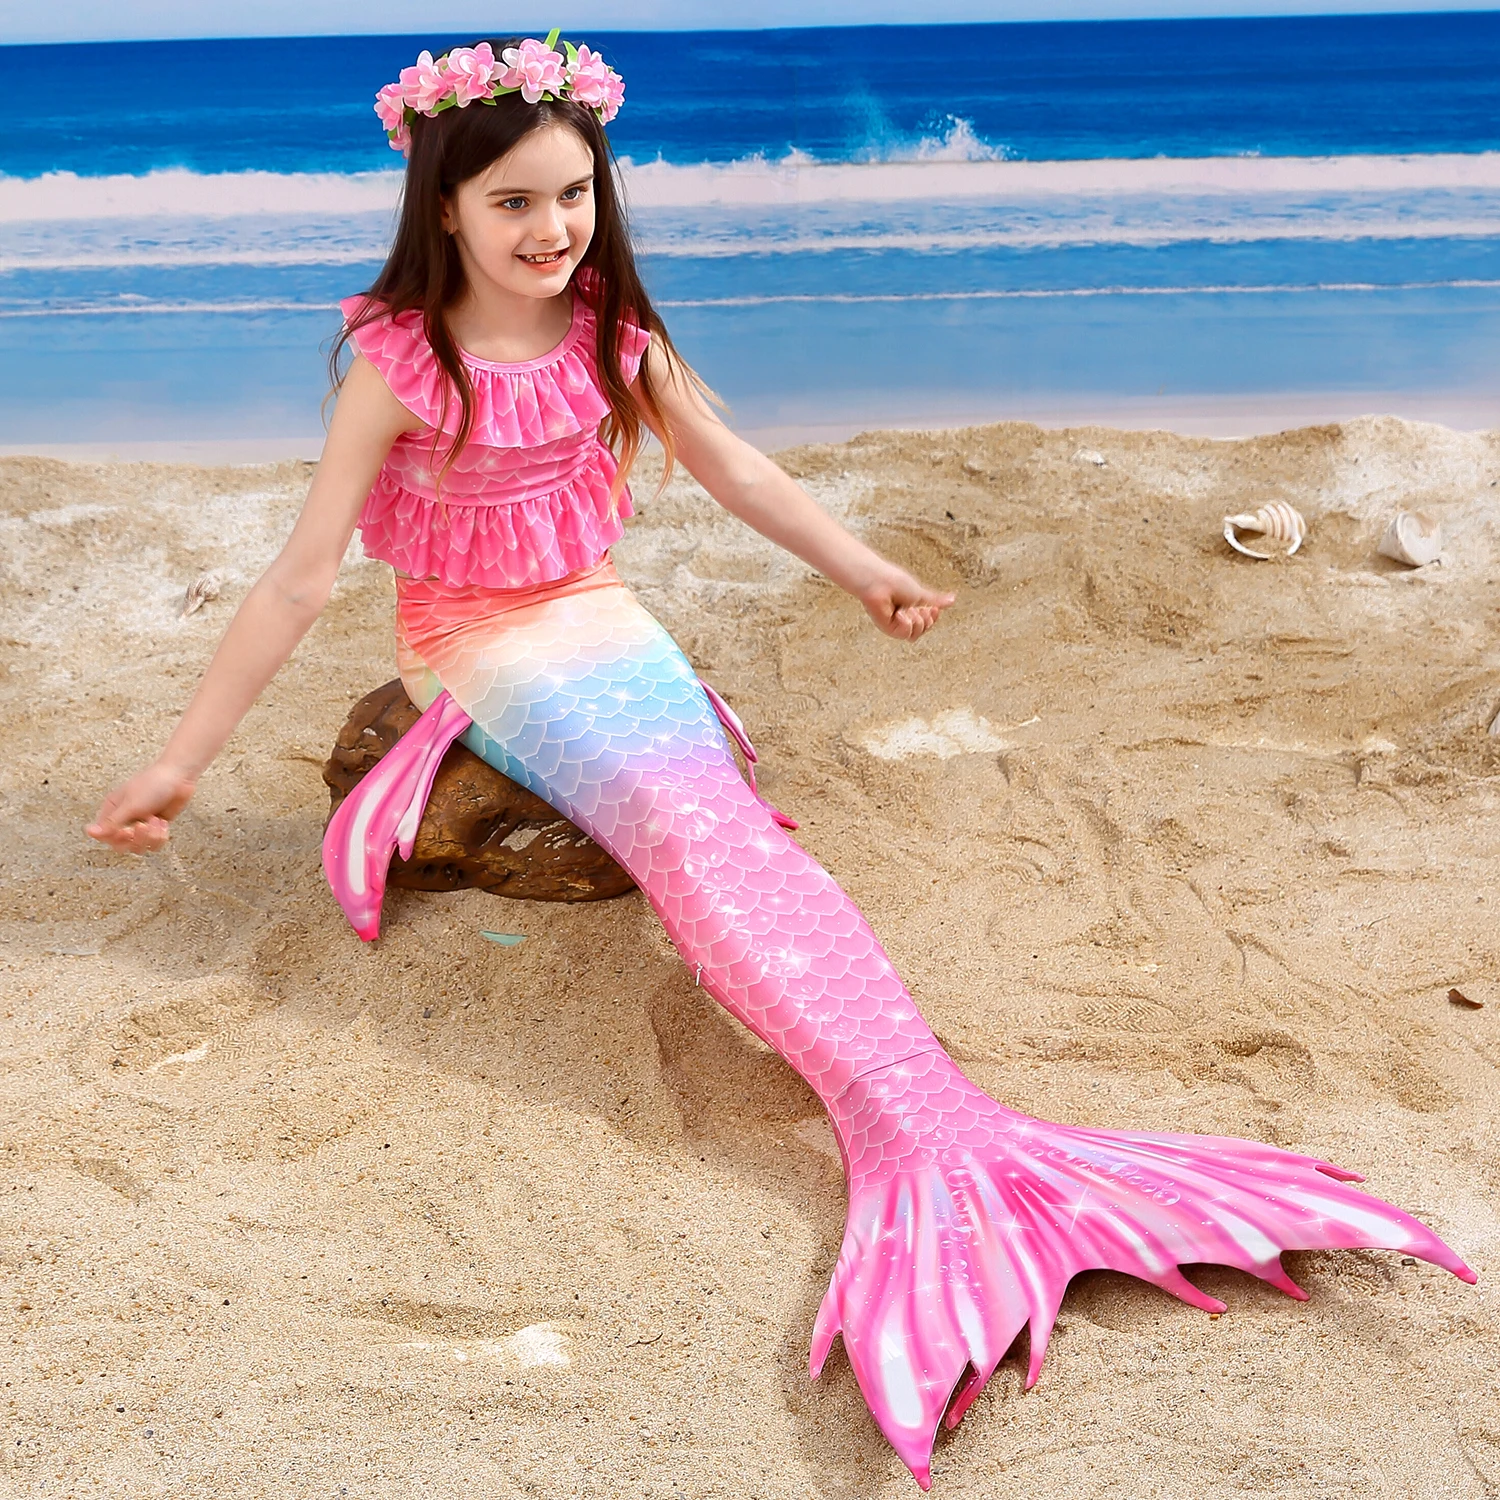 

New Mermaid Tail Kids For Girls Summer Dress Little Mermaid Costume Fantasy Children Party Cosplay Beach Clothes Bathing Suit